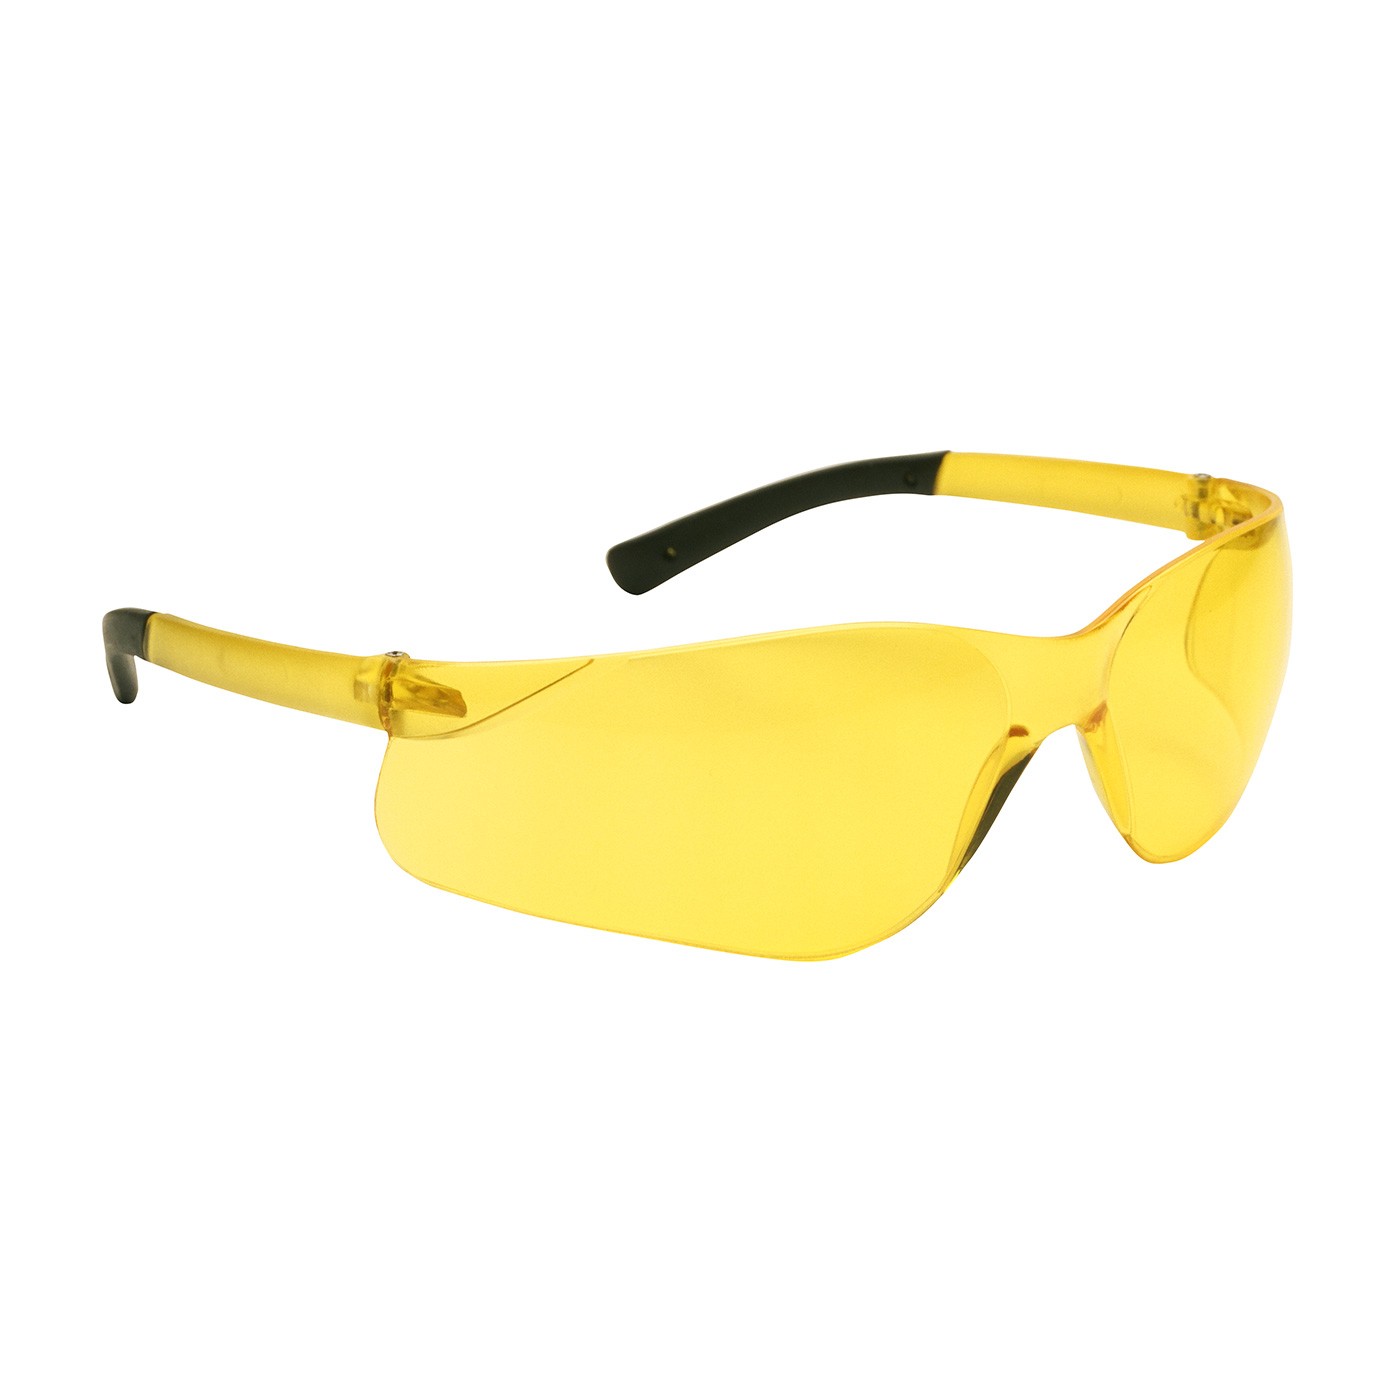 Zenon Z13™ Rimless Safety Glasses with Amber Temple, Amber Lens and Anti-Scratch Coating  (#250-06-5509)